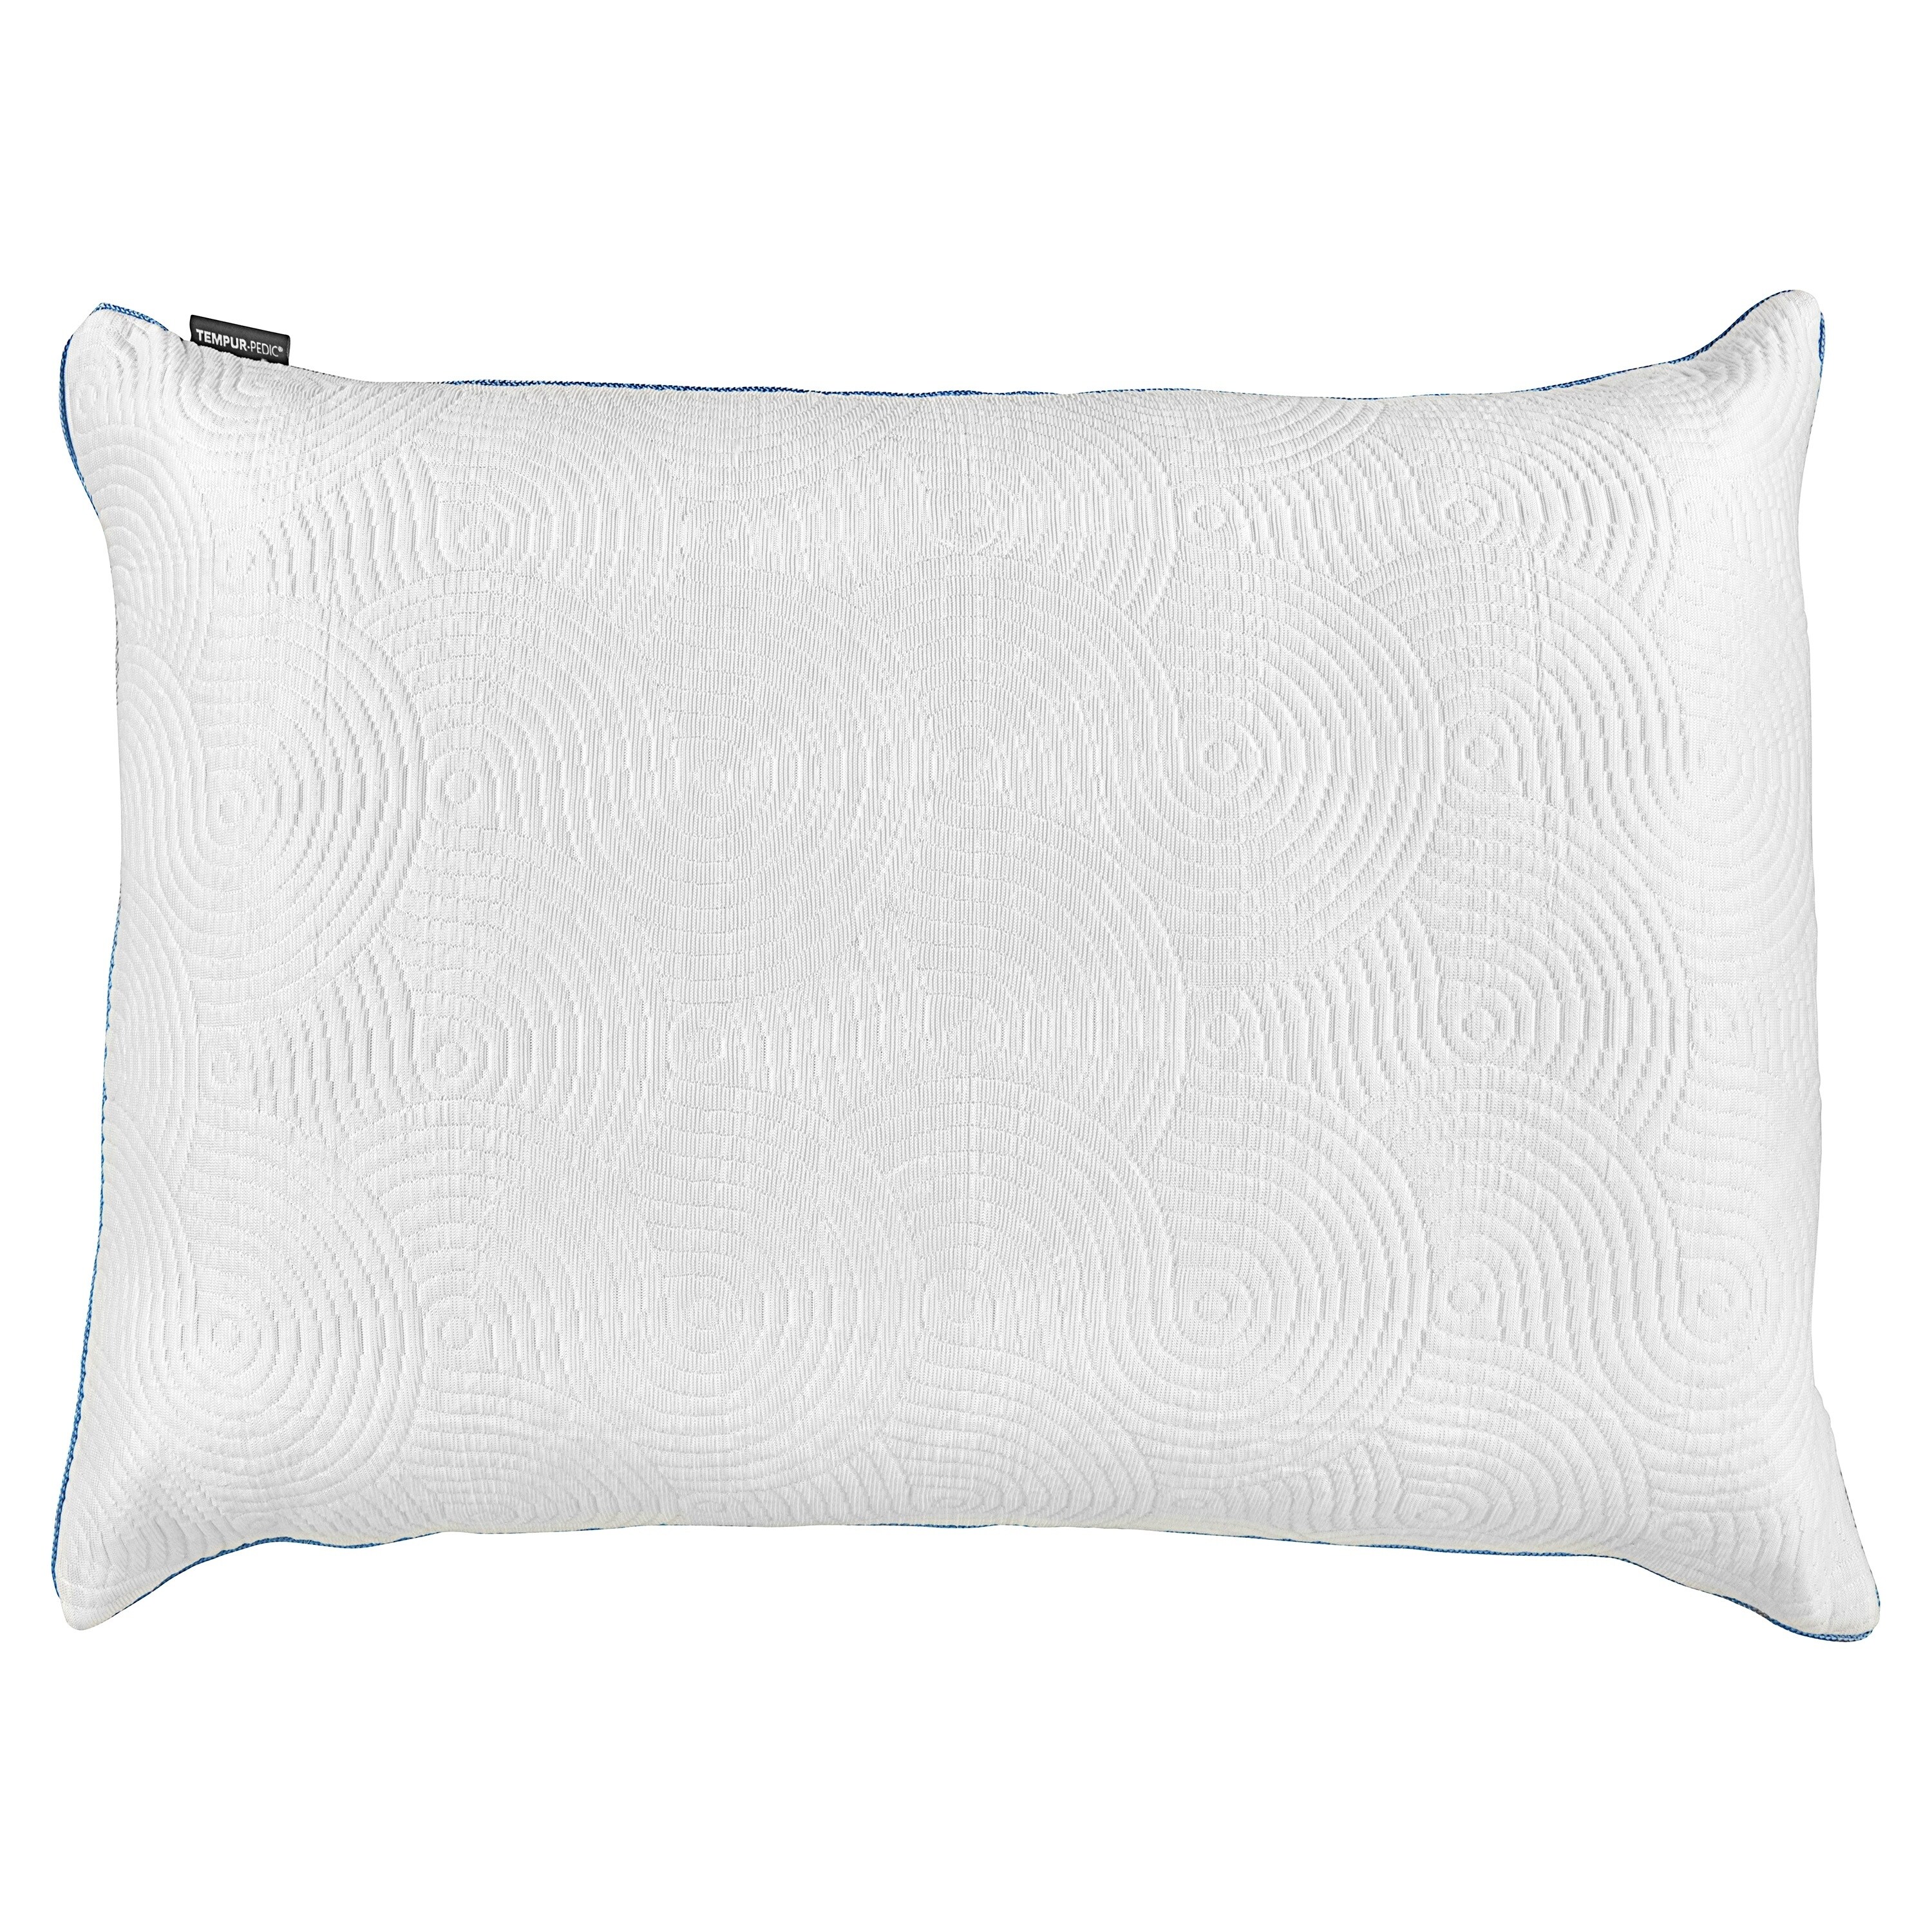 luxury pillow protector